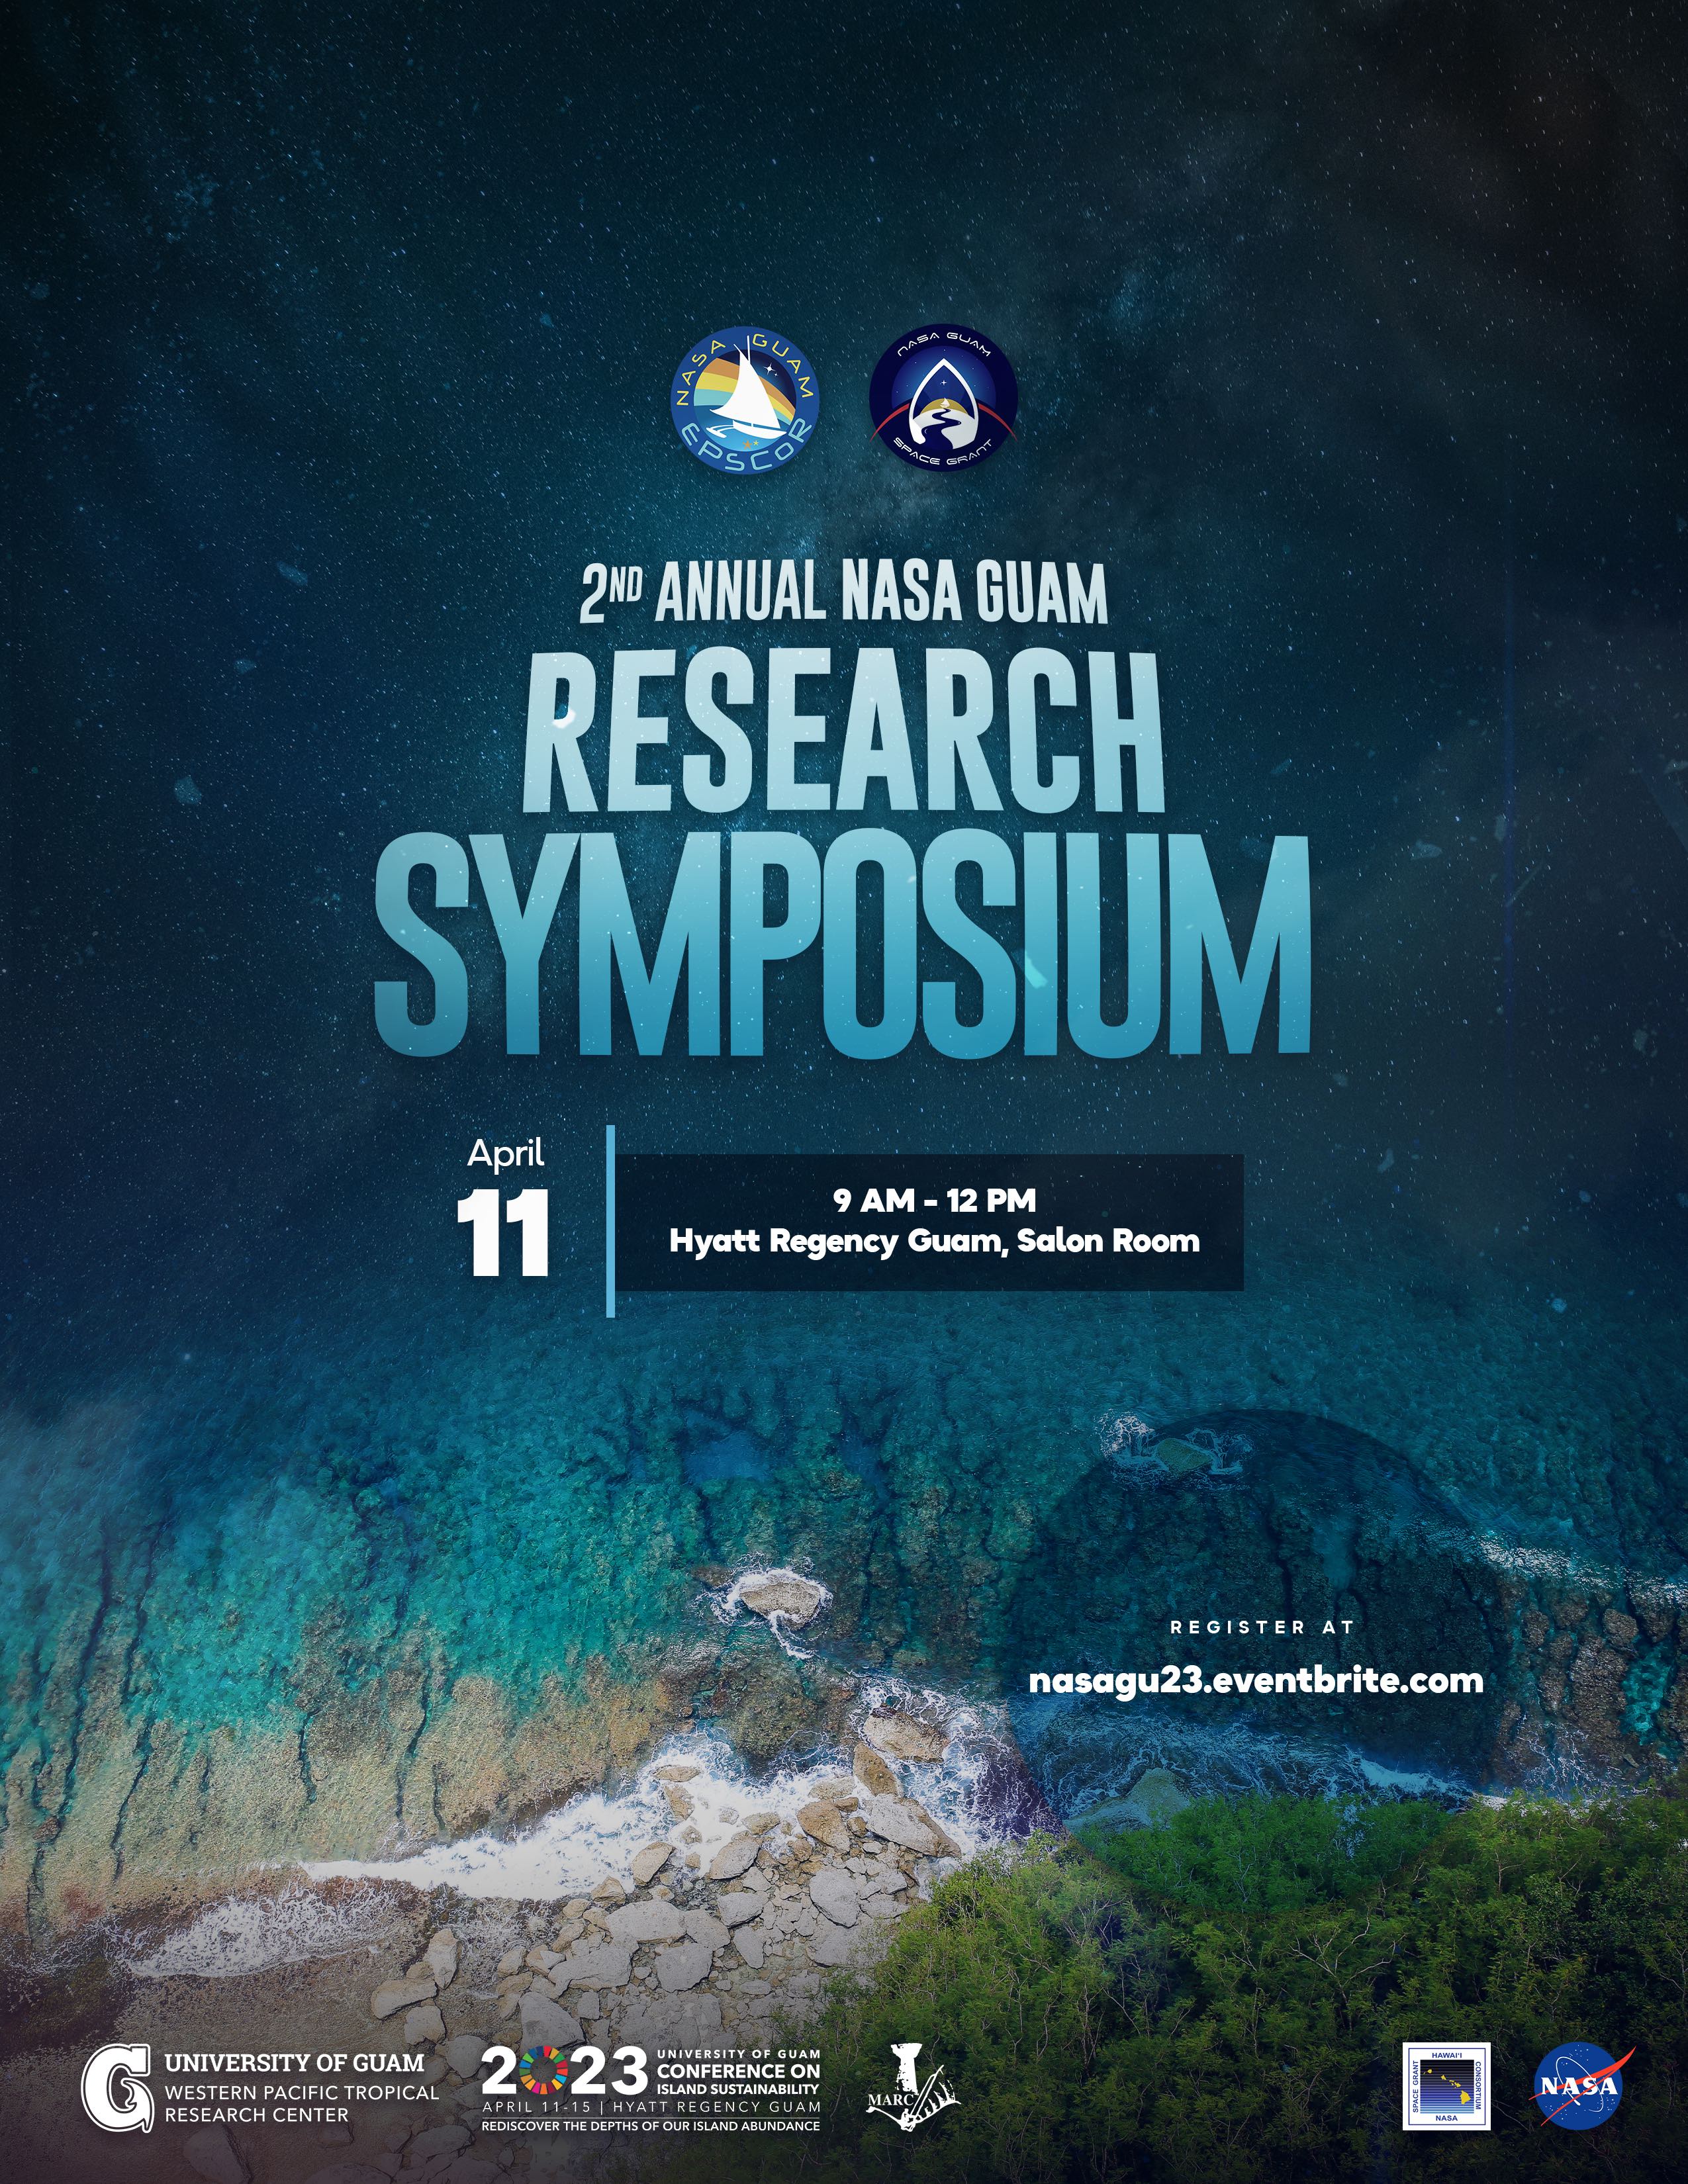 The NASA Guam Research Symposium flyer invited the public to the event on Tuesday, April 11 at the Hyatt Regency Guam Salon Room. 